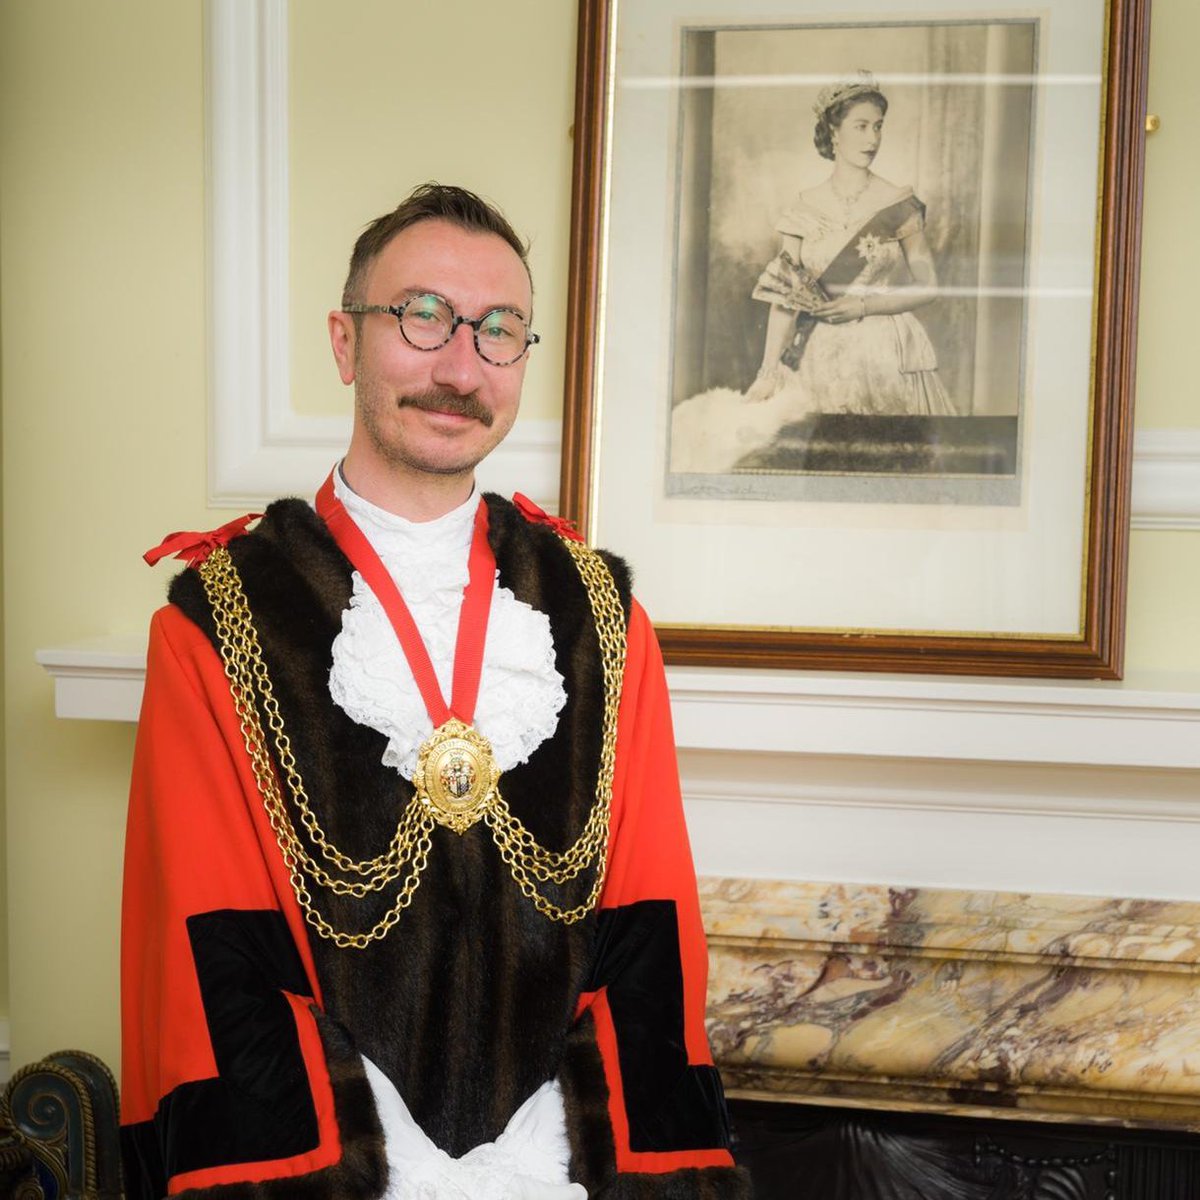 Today marks Cllr  @philipnormal's last day as Mayor of Lambeth before handing over the reigns to Cllr  @AnnieGallop. We wanted to take a moment to look back on his incredible year in office - thread 